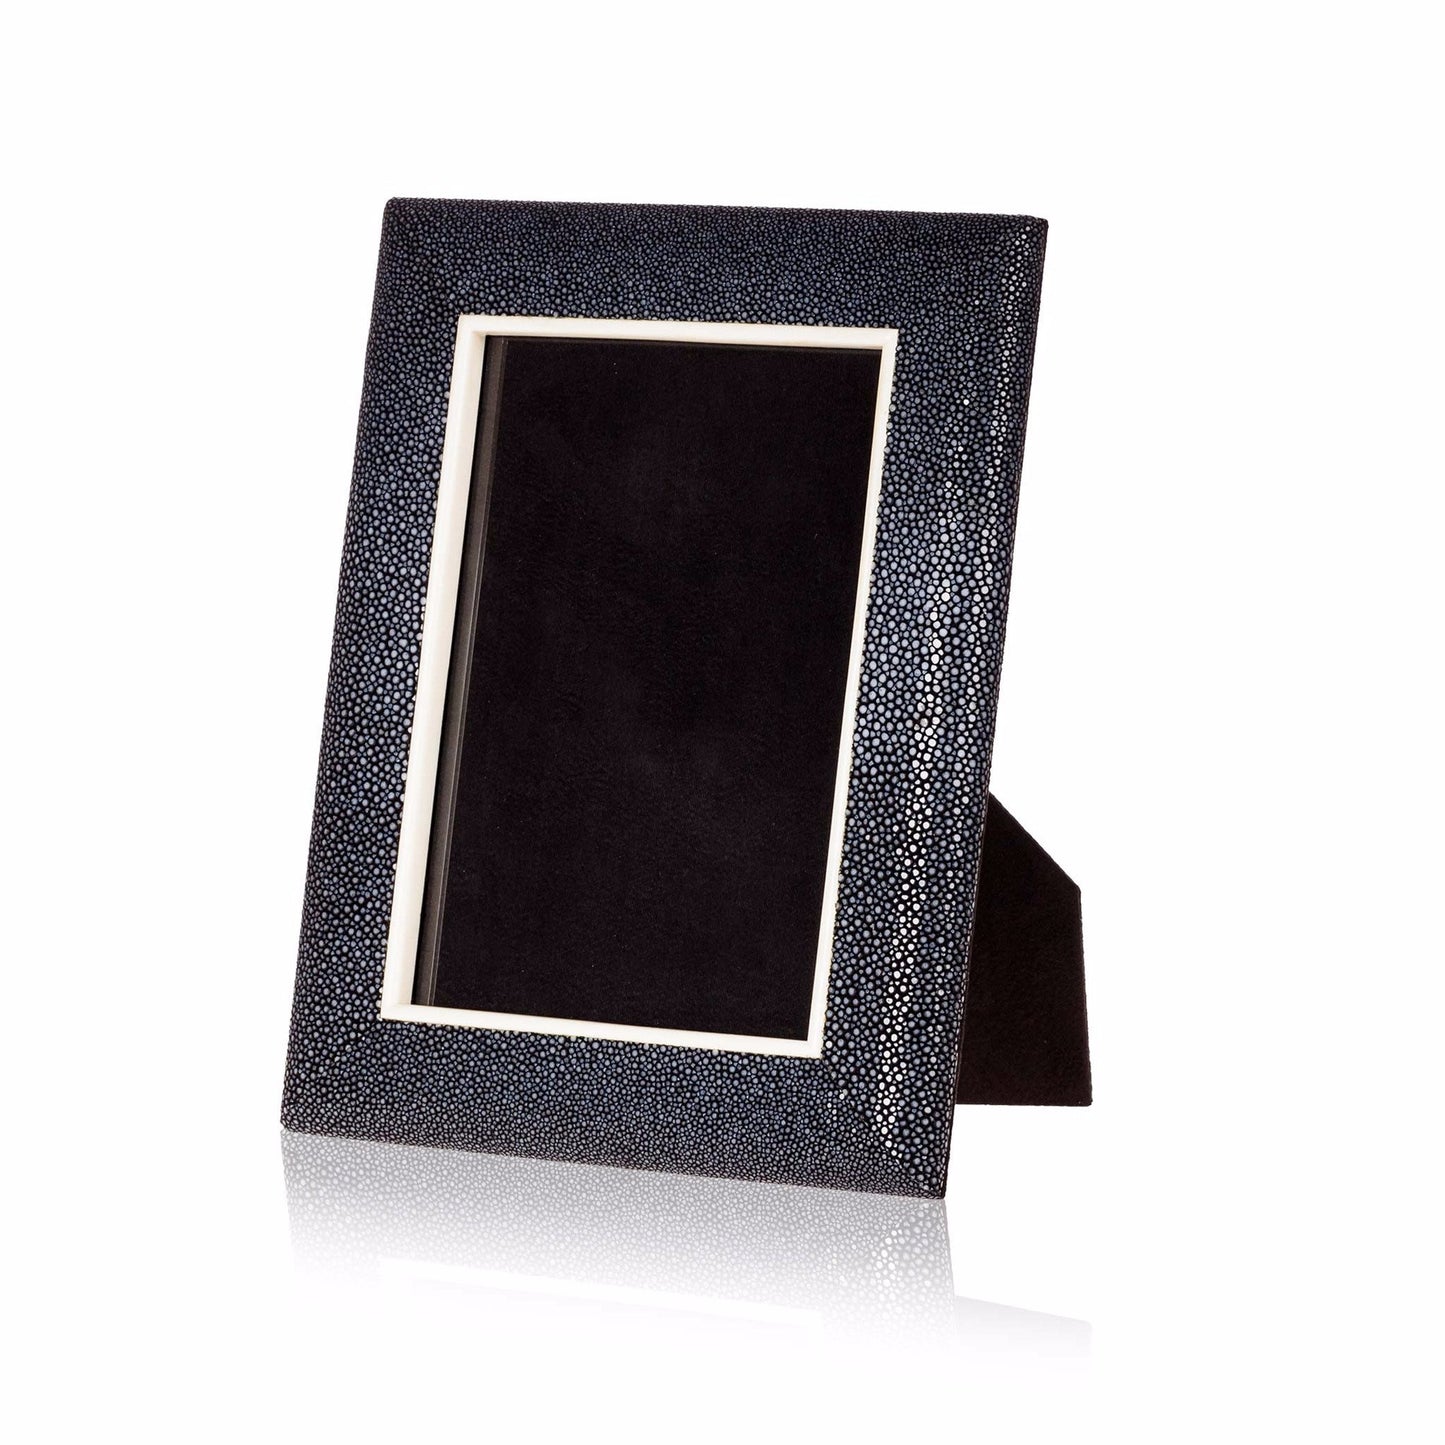 Picture Frame in Brown Stingray Leather 5x7"